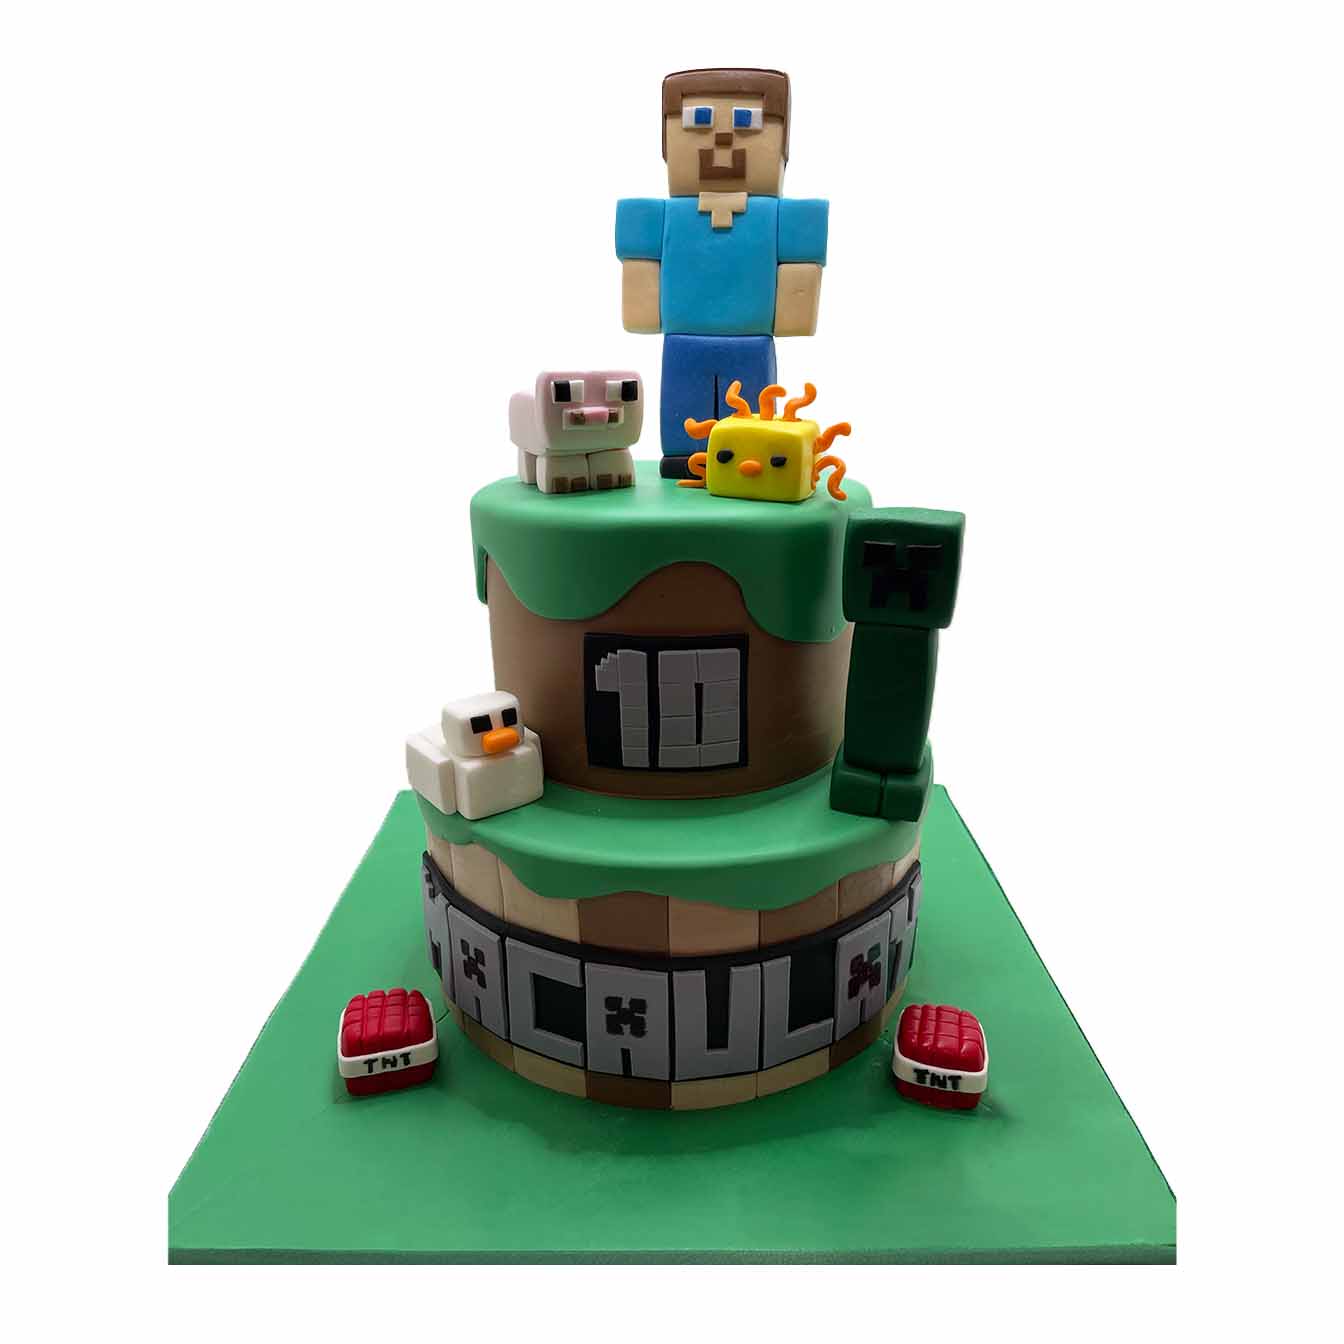 Minecraft Block Party Cake - A 2-tier cake with moulded Minecraft characters, Steve, pig, yellow duck, goose, creeper, TNT bombs, and a bottom tier inspired by Minecraft square blocks, a captivating centrepiece for gamers and Minecraft enthusiasts.